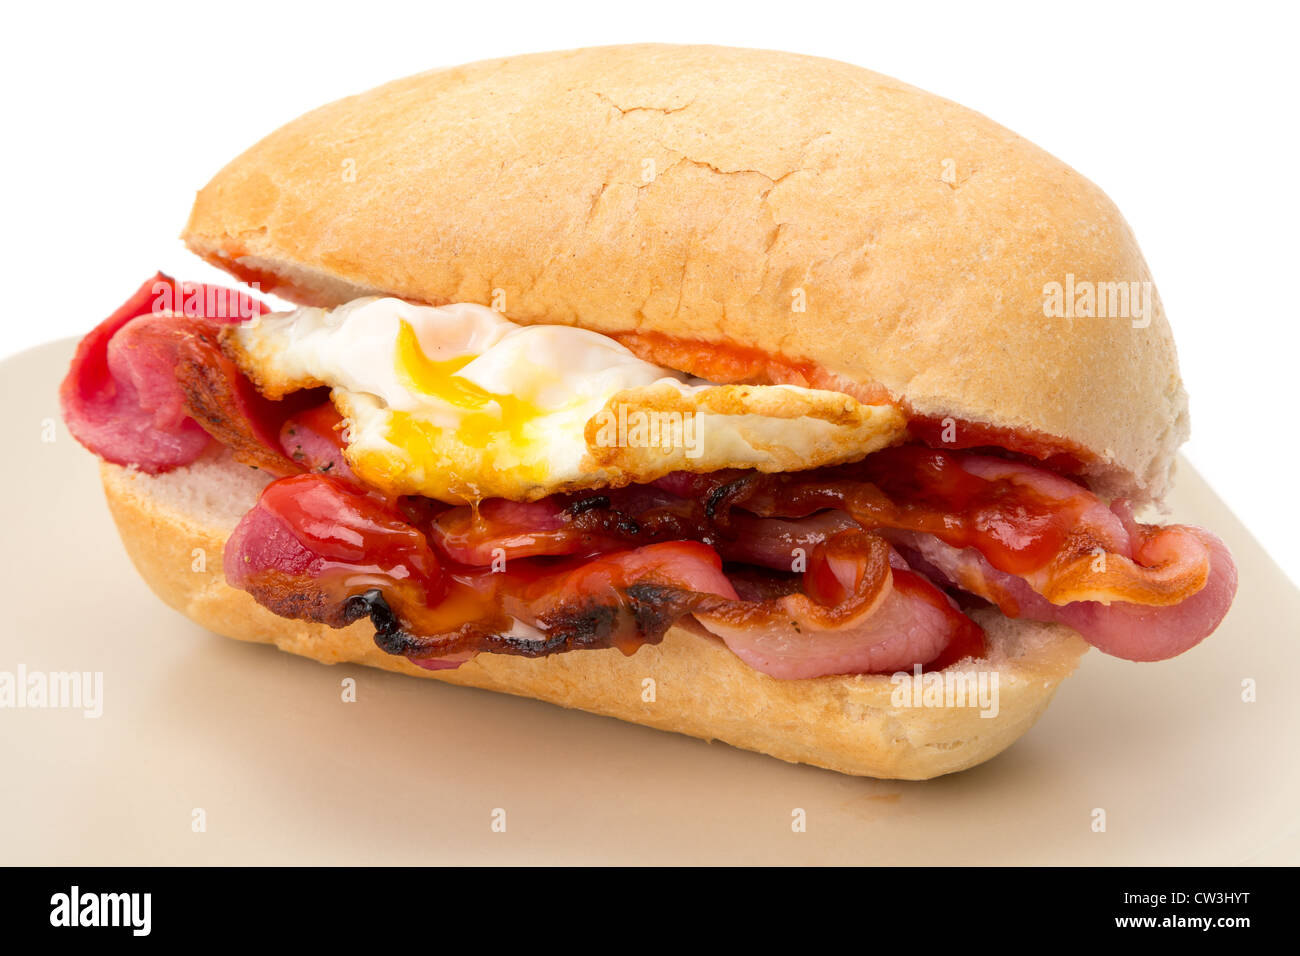 Crispy bacon and a fried egg with tomato ketchup in a bread roll - shallow depth of field - studio shot with a white background Stock Photo